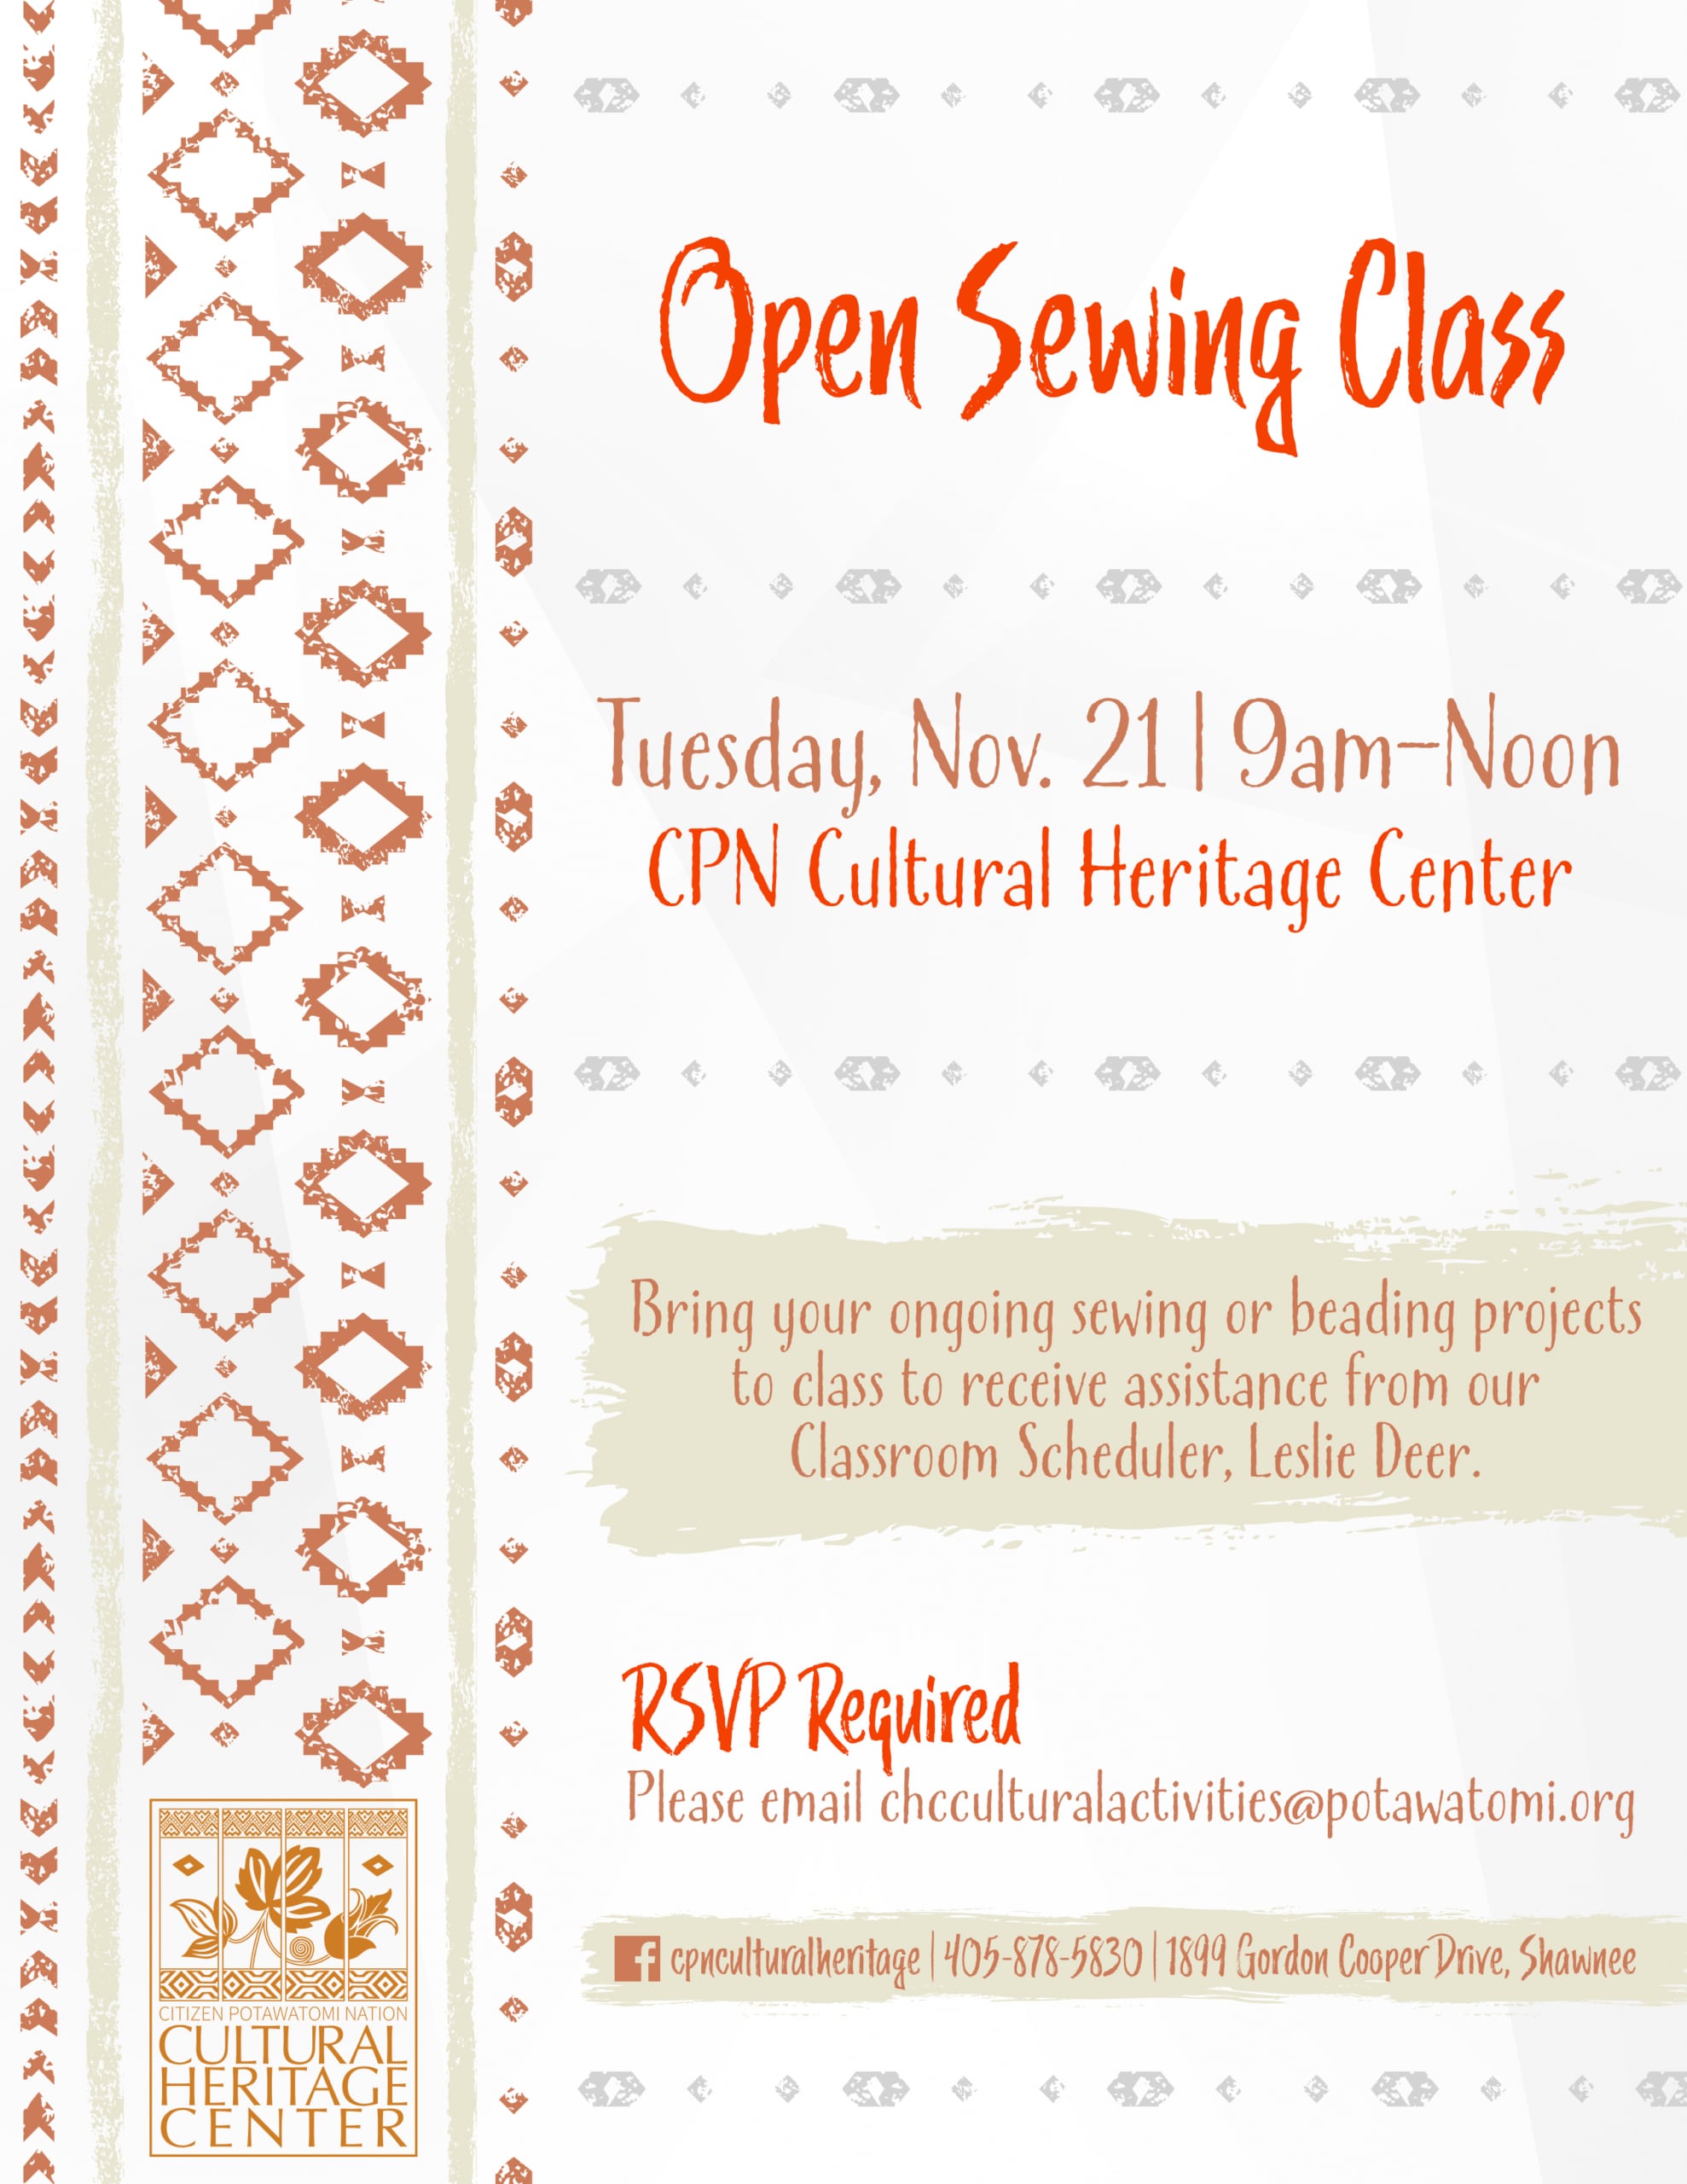 Brown and orange geometric patterns frame class details for open sewing class on November 21, 2023.